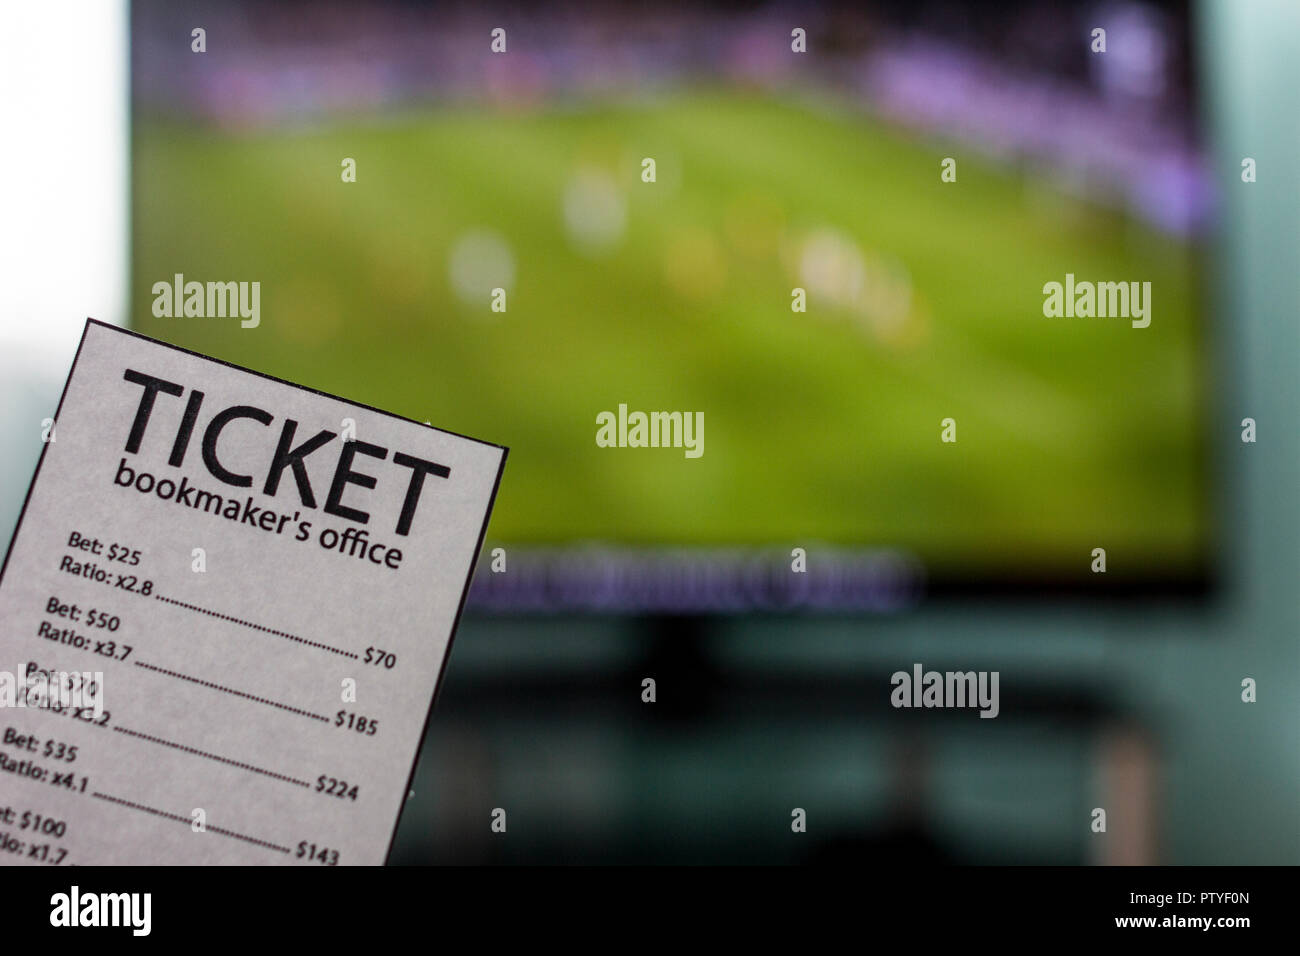 The World Cup is on the TV in the hands of a ticket office bookmaker, sports betting, close-ups Stock Photo